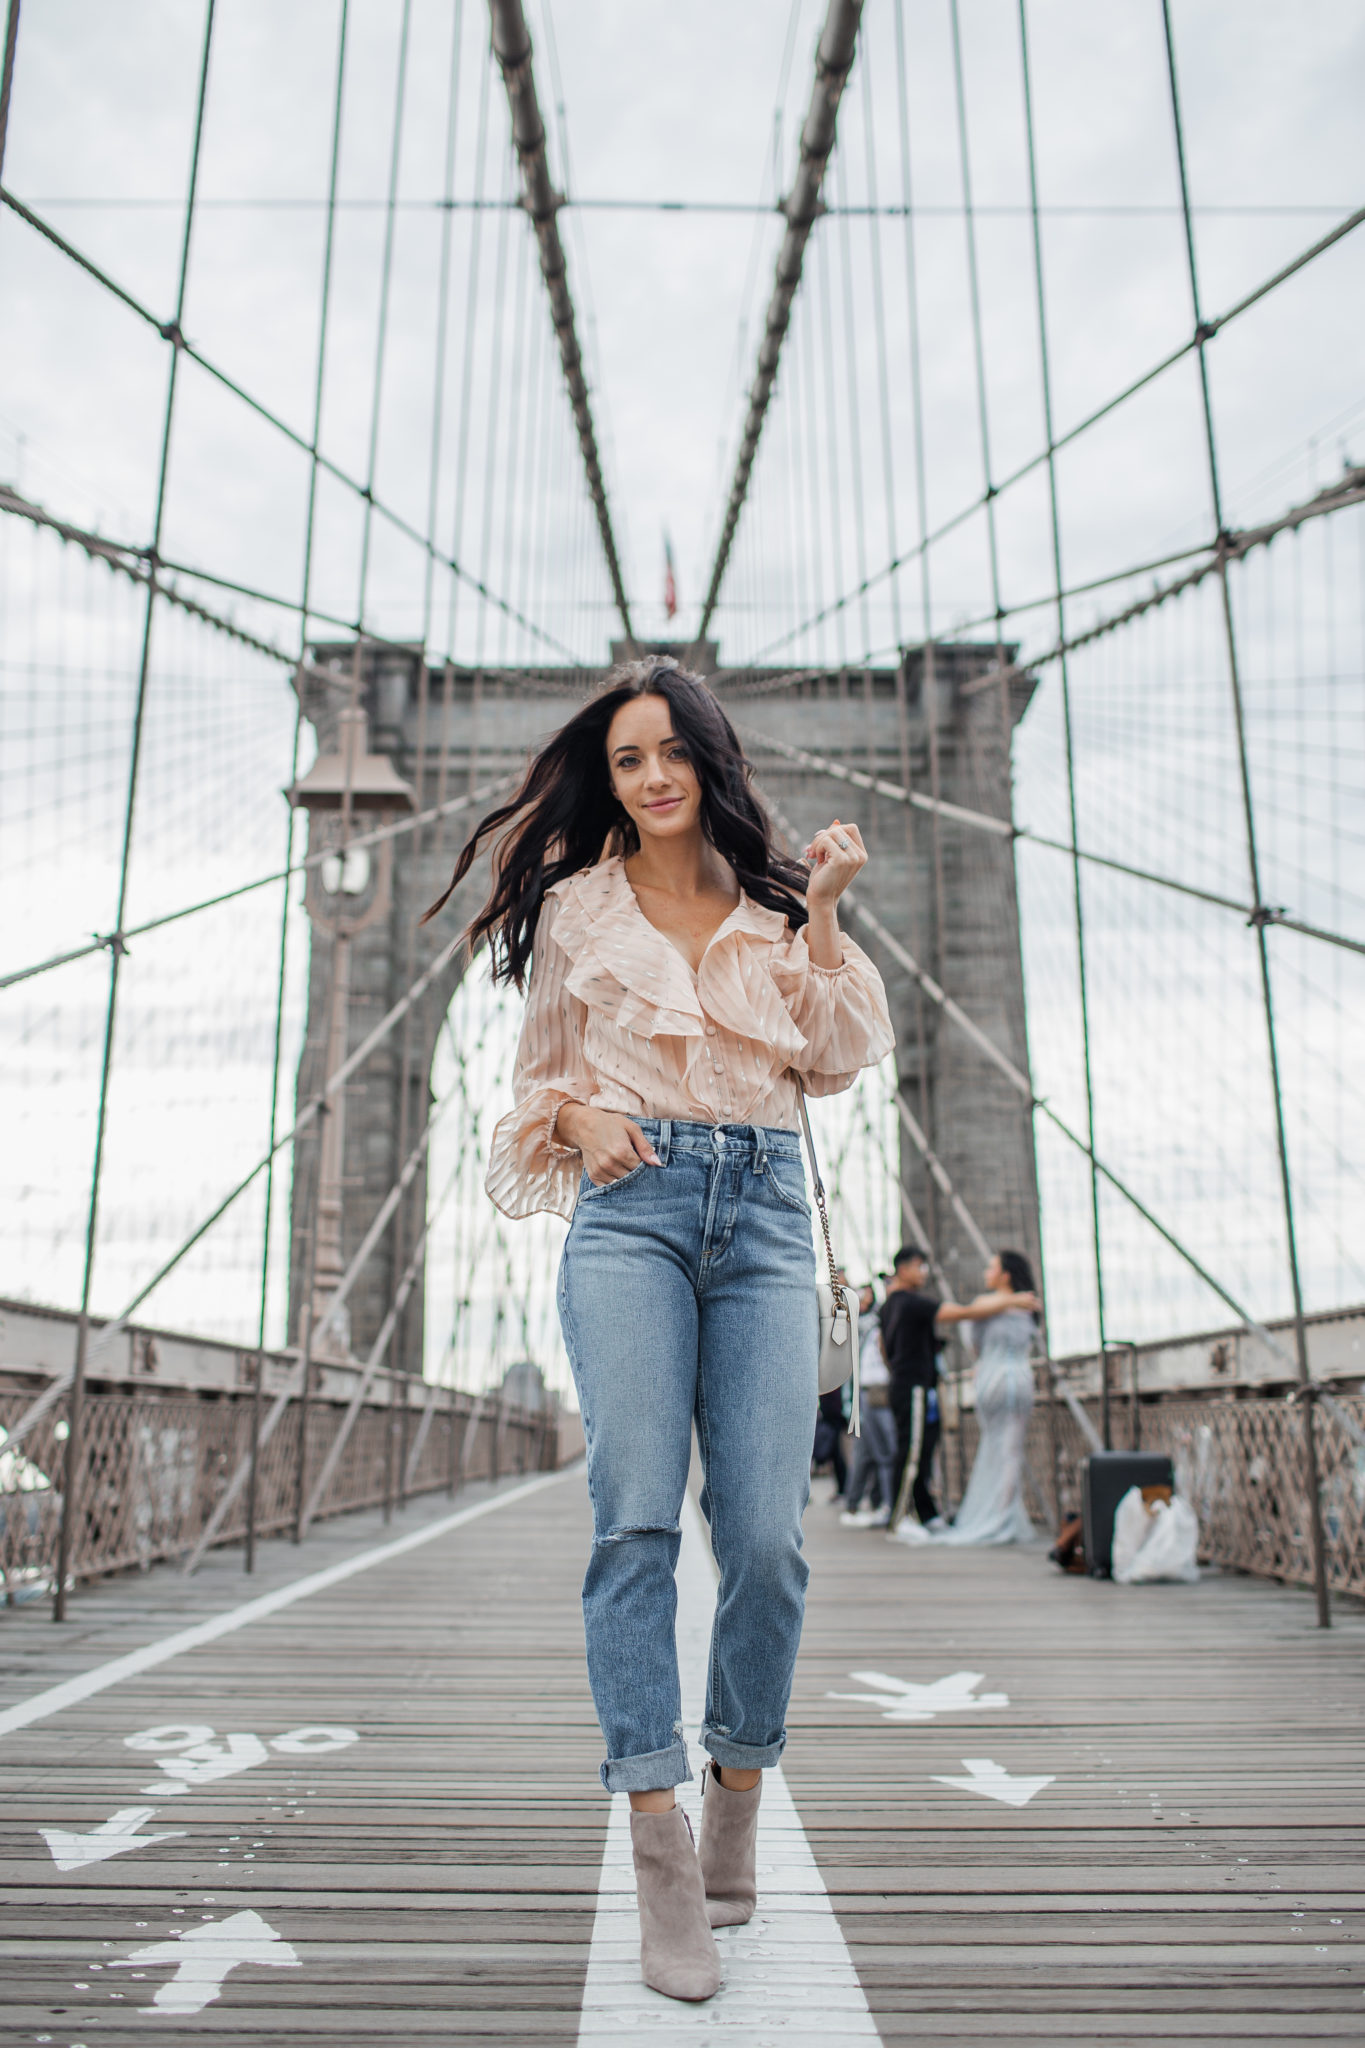 How to style a striped bodysuit for Fall, tips featured by top US fashion blog, Outfits & Outings: image of a woman wearing a REVOLVE striped bodysuit, SOCIALITE high waist slim jeans, and Vince Camuto suede booties.